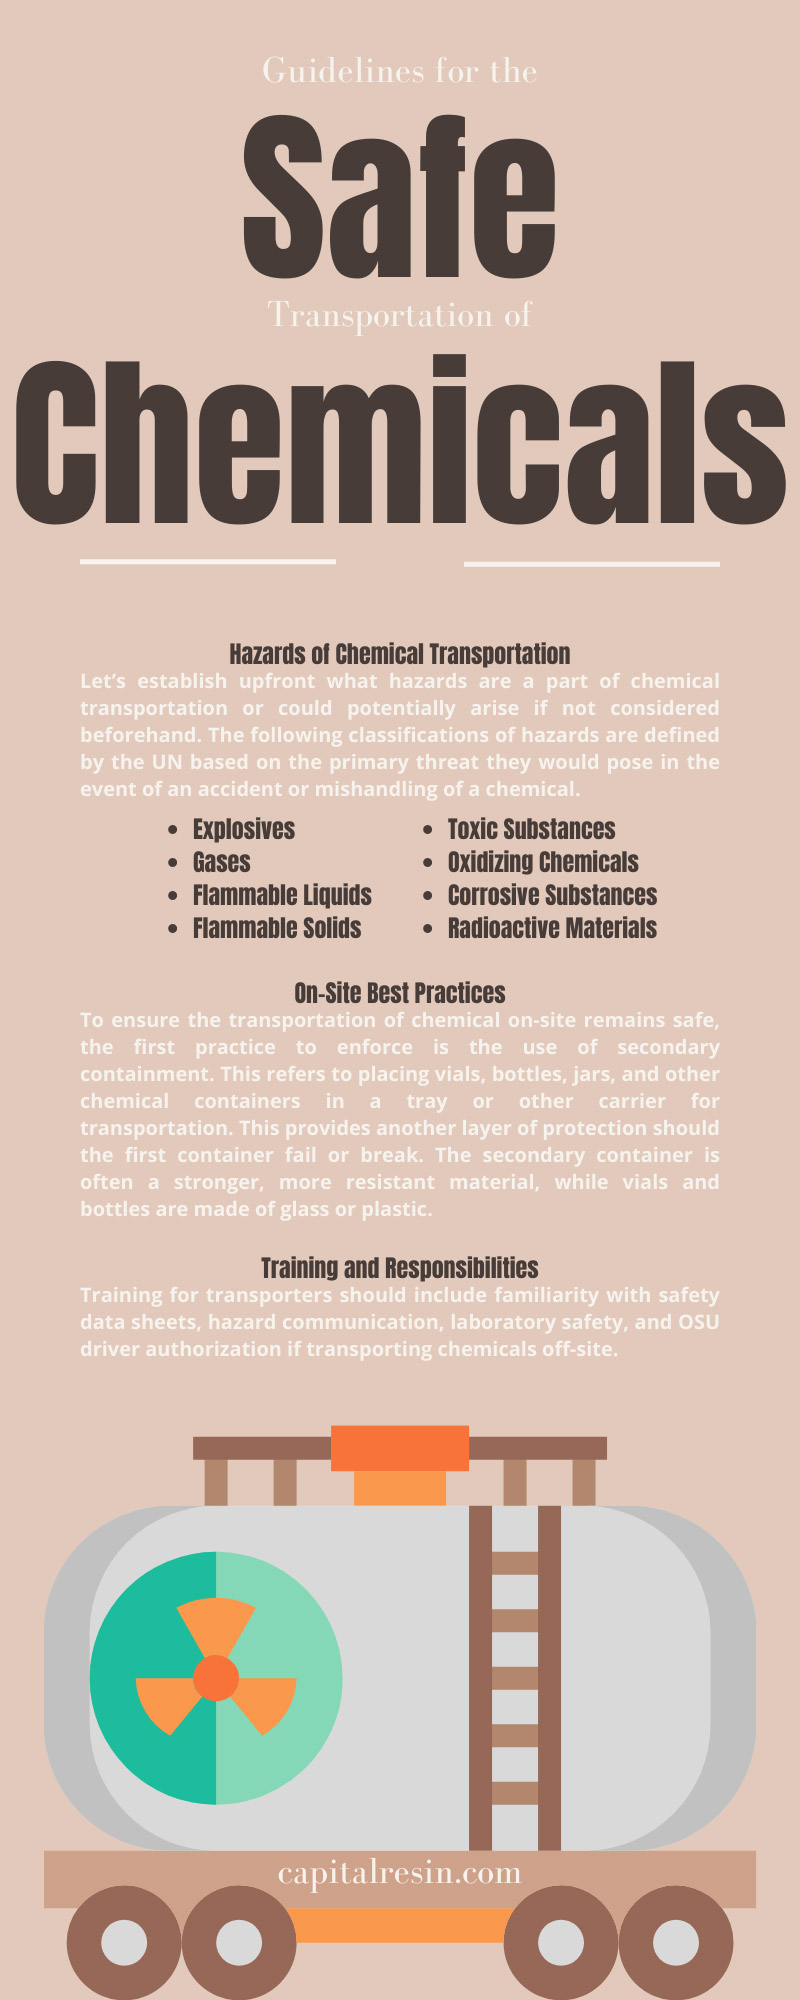 Guidelines for the Safe Transportation of Chemicals